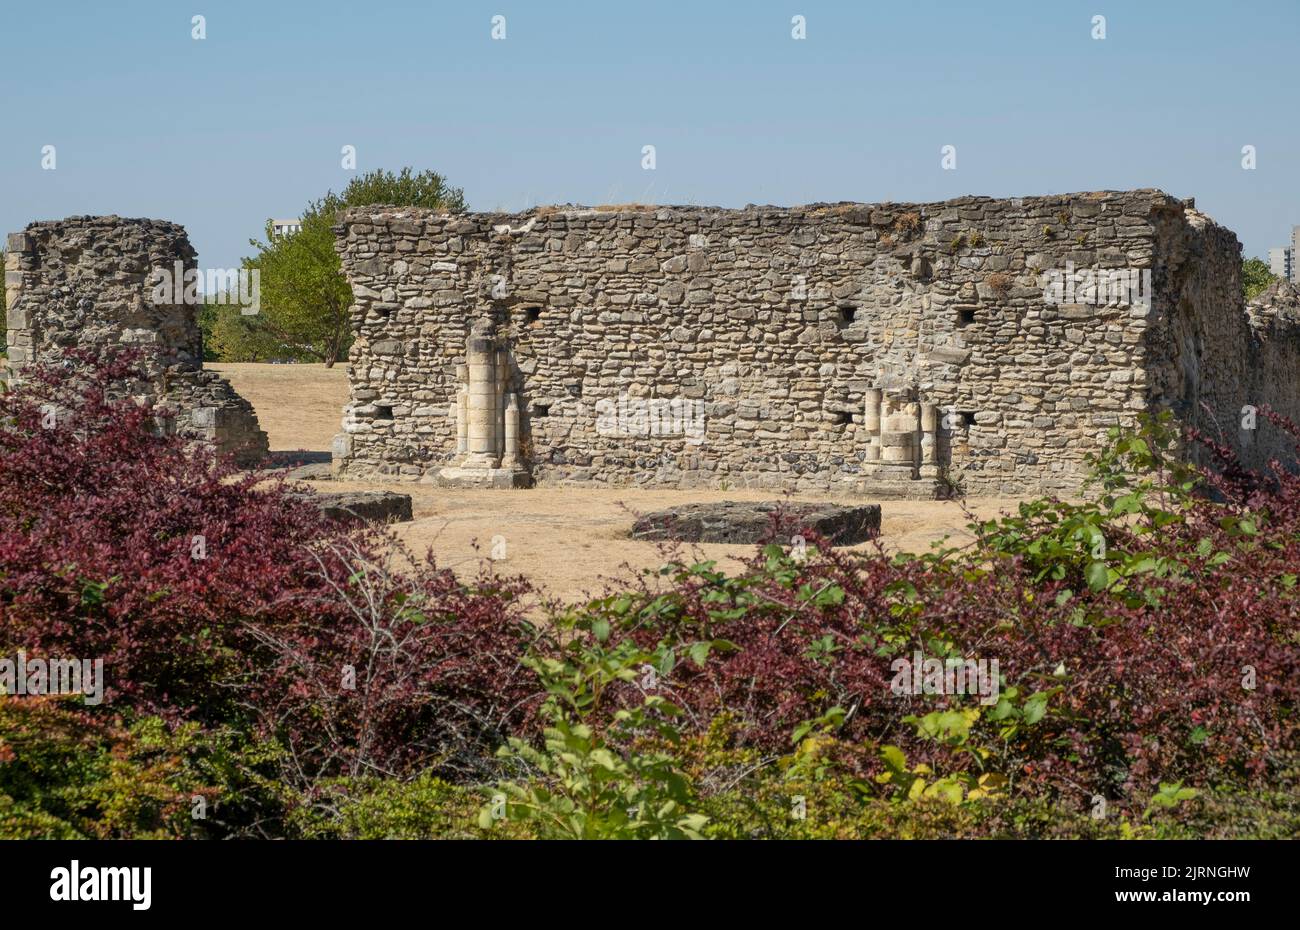 The ancient remains of Lesnes Abbey, the 12th century built monastery located at Abbey Wood, in the London Borough of Bexley, United Kingdom. Stock Photo